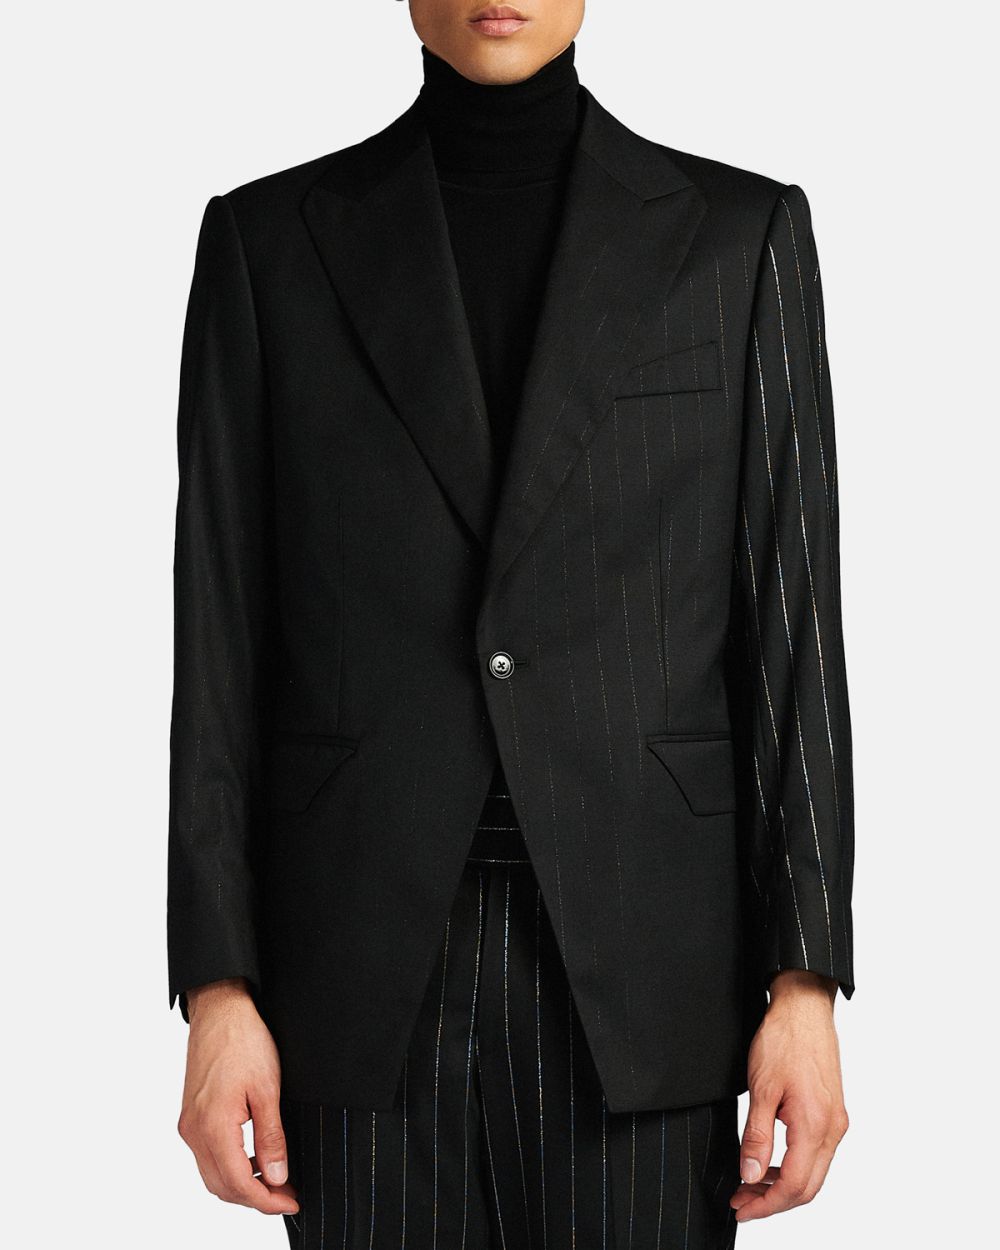 Single Breasted Event Black Diplomatic Suit